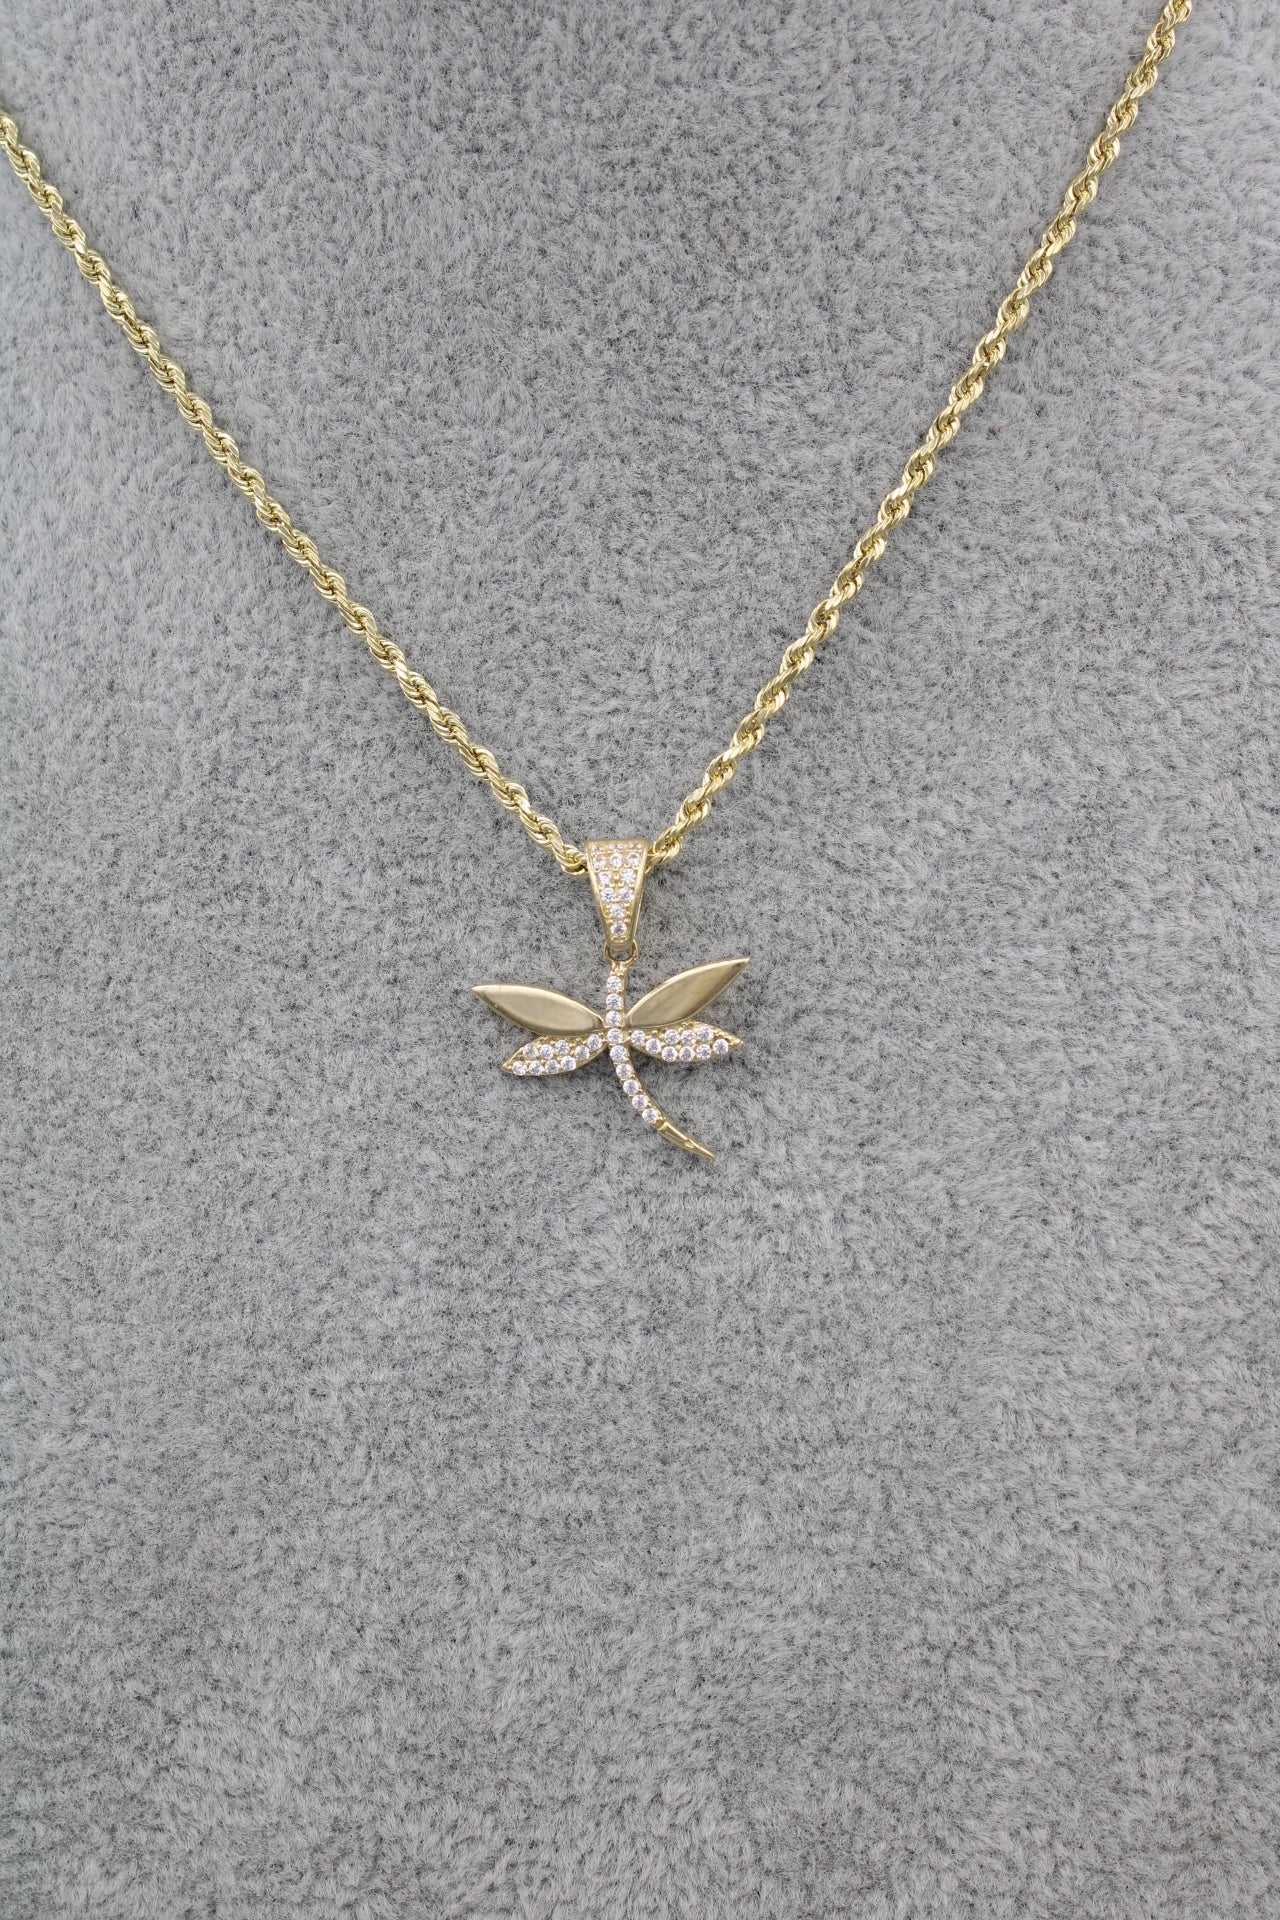 14K Hollow Rope Chain || Cubic Zirconia Dragonfly Pendant